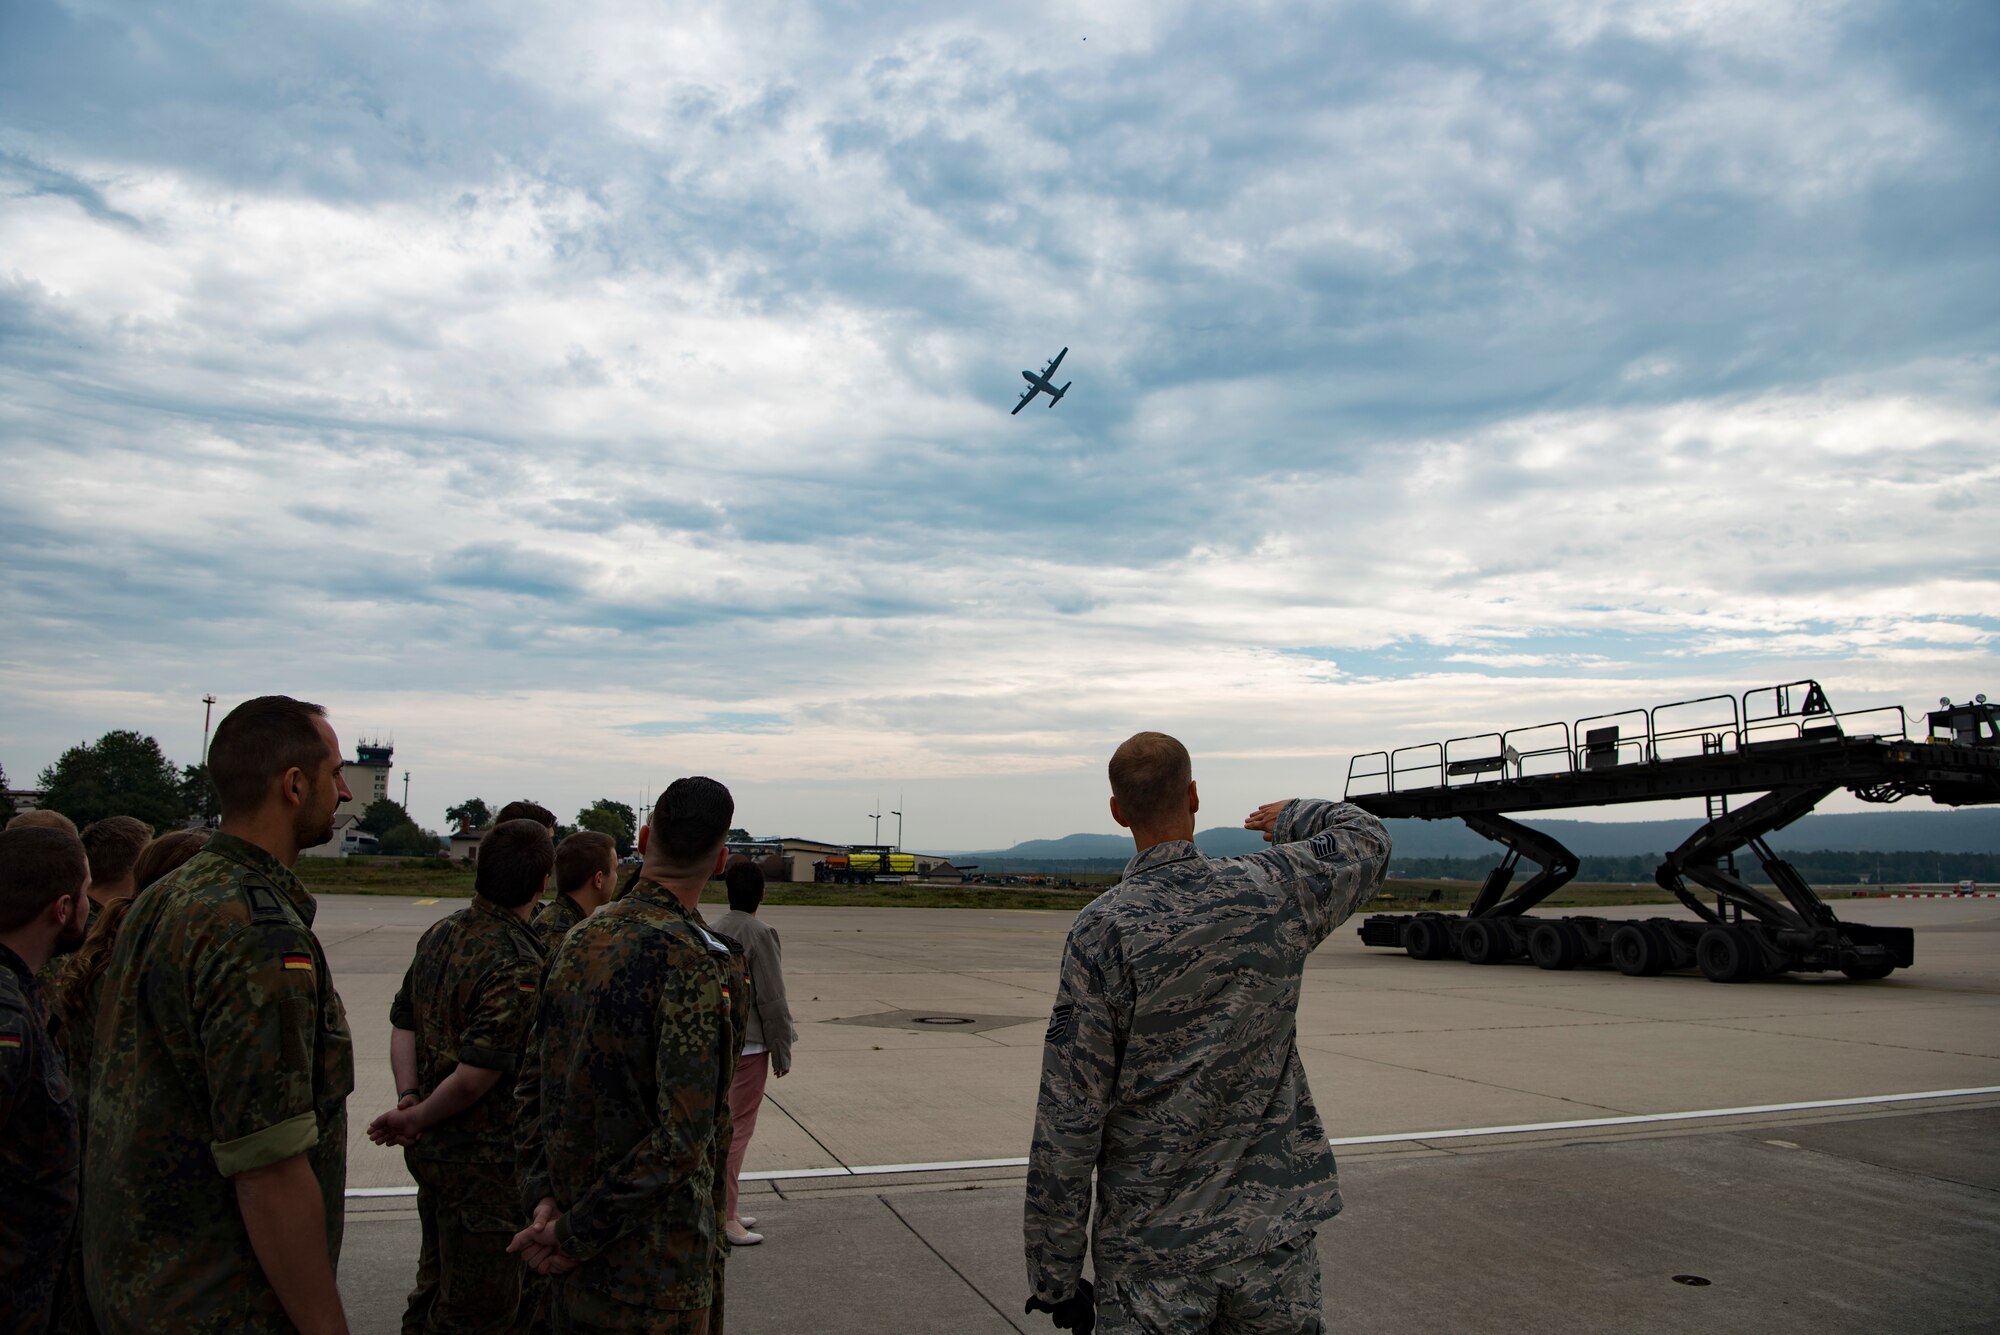 U.S. Air Force Technical Sgt. Patrick David, 721st Aerial Port Squadron Ramp Services Operations non-commissioned officer in charge, gives German Forces loadmasters a tour of a section of the airfield near the static C-17 Globemaster they boarded on Ramstein Air Base, Germany, Sep. 13, 2018. The intent of the visit for German Forces loadmasters was to further the training of German loadmasters who frequently work with the C-17 Globemaster’s and C-5 Galaxy’s.